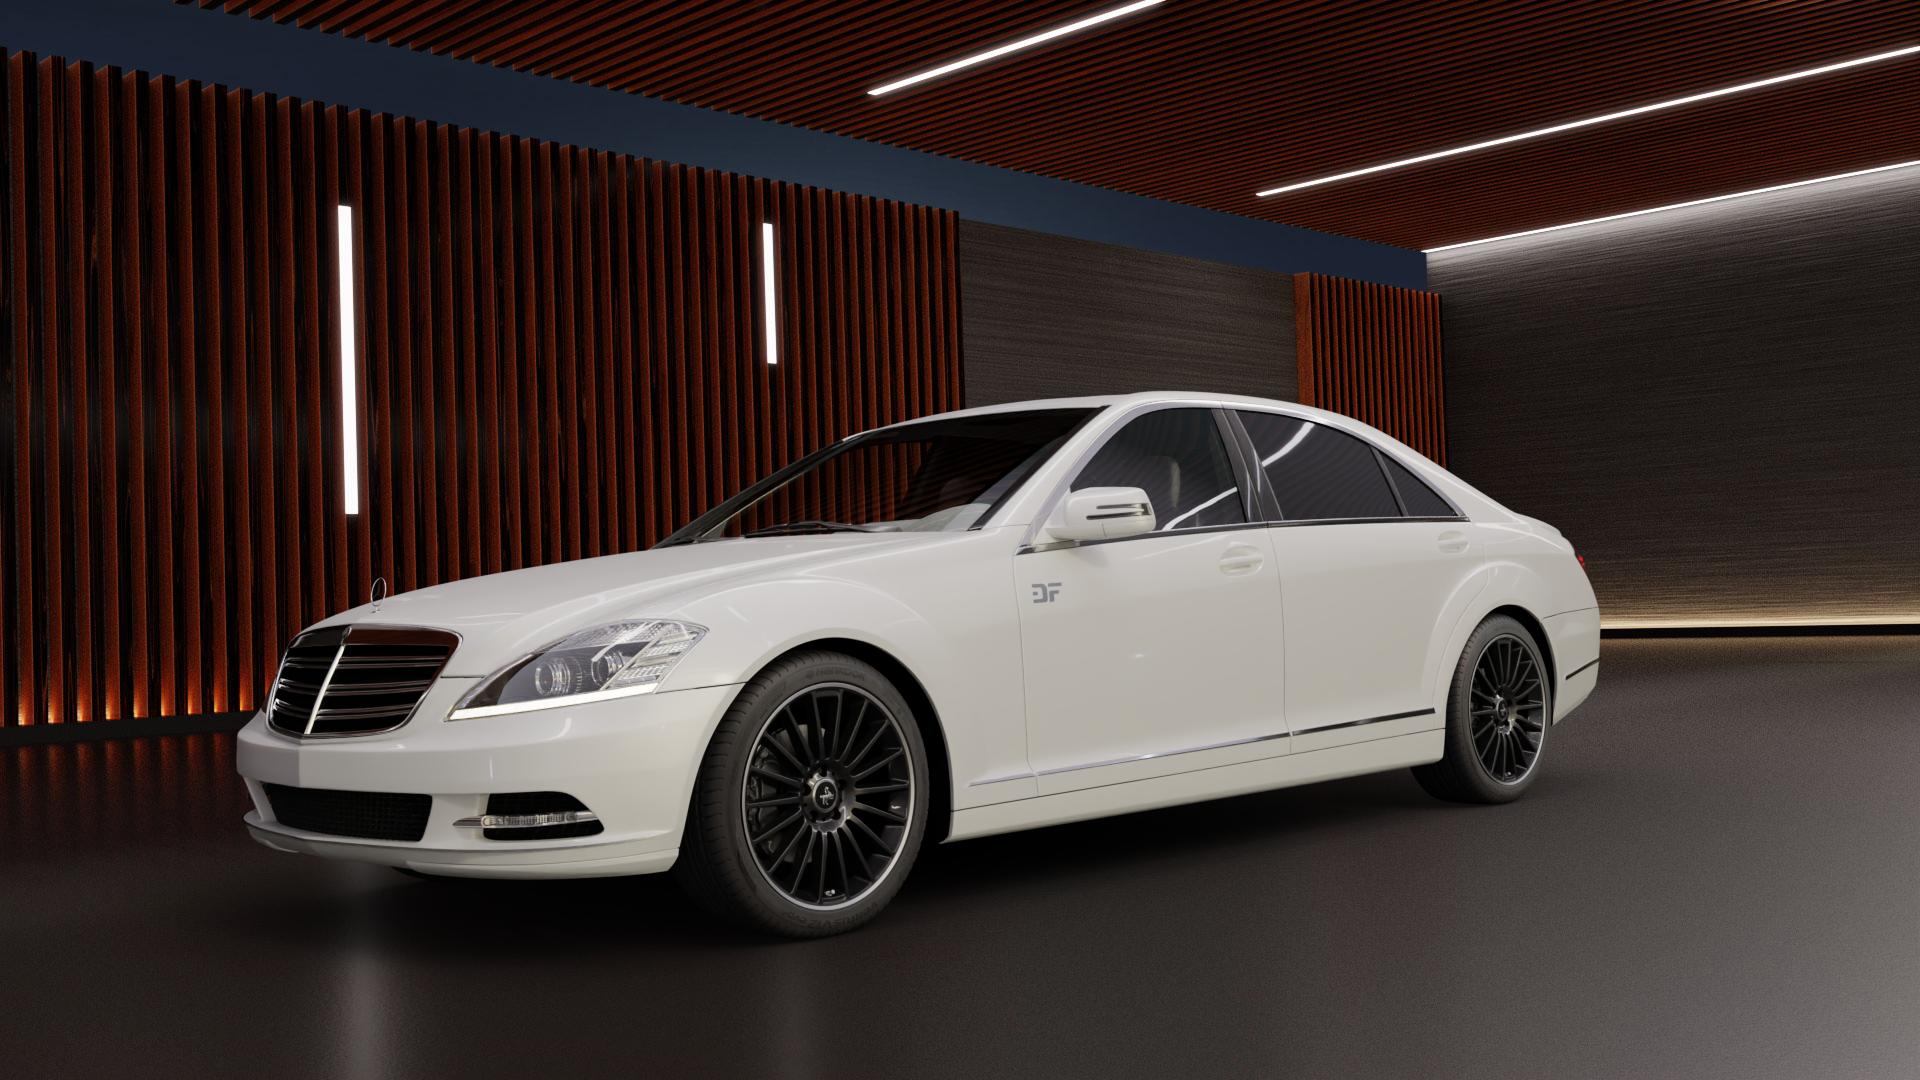 Mercedes S-Class Type W221 3,0l S 350 CDI 173kW (235 hp) Wheels and Tyre  Packages